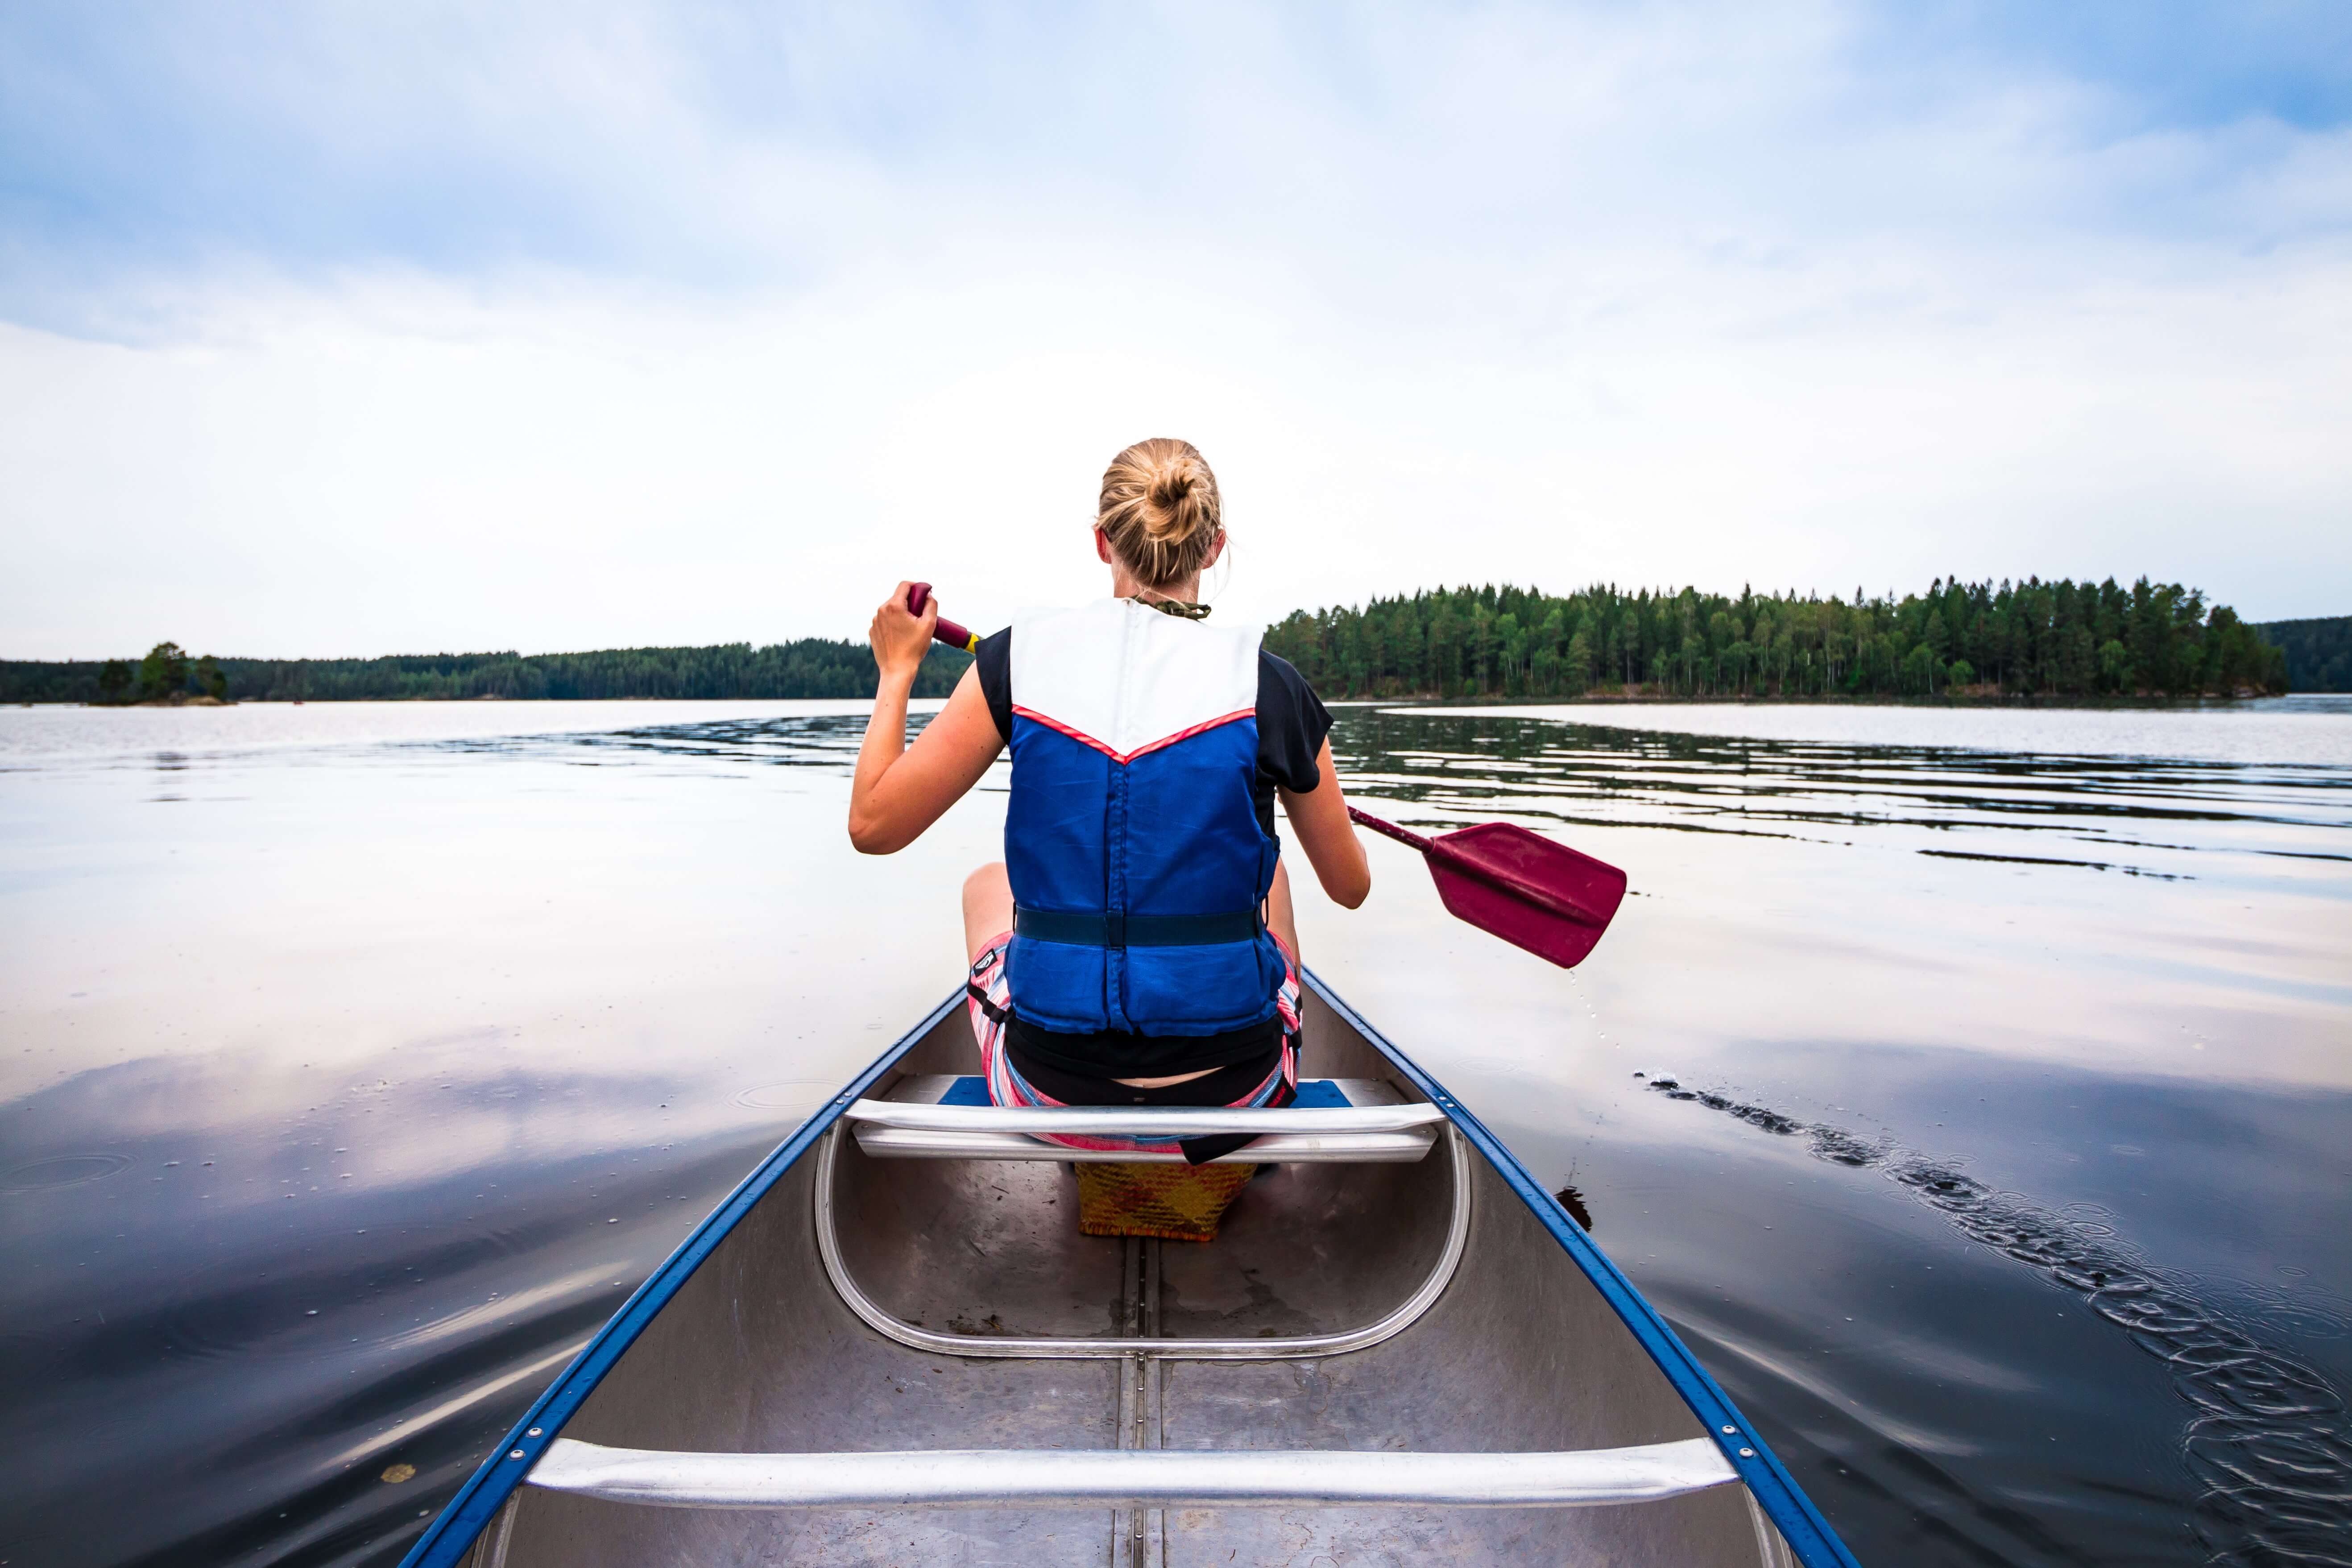 A woman kayaking photographed from behind